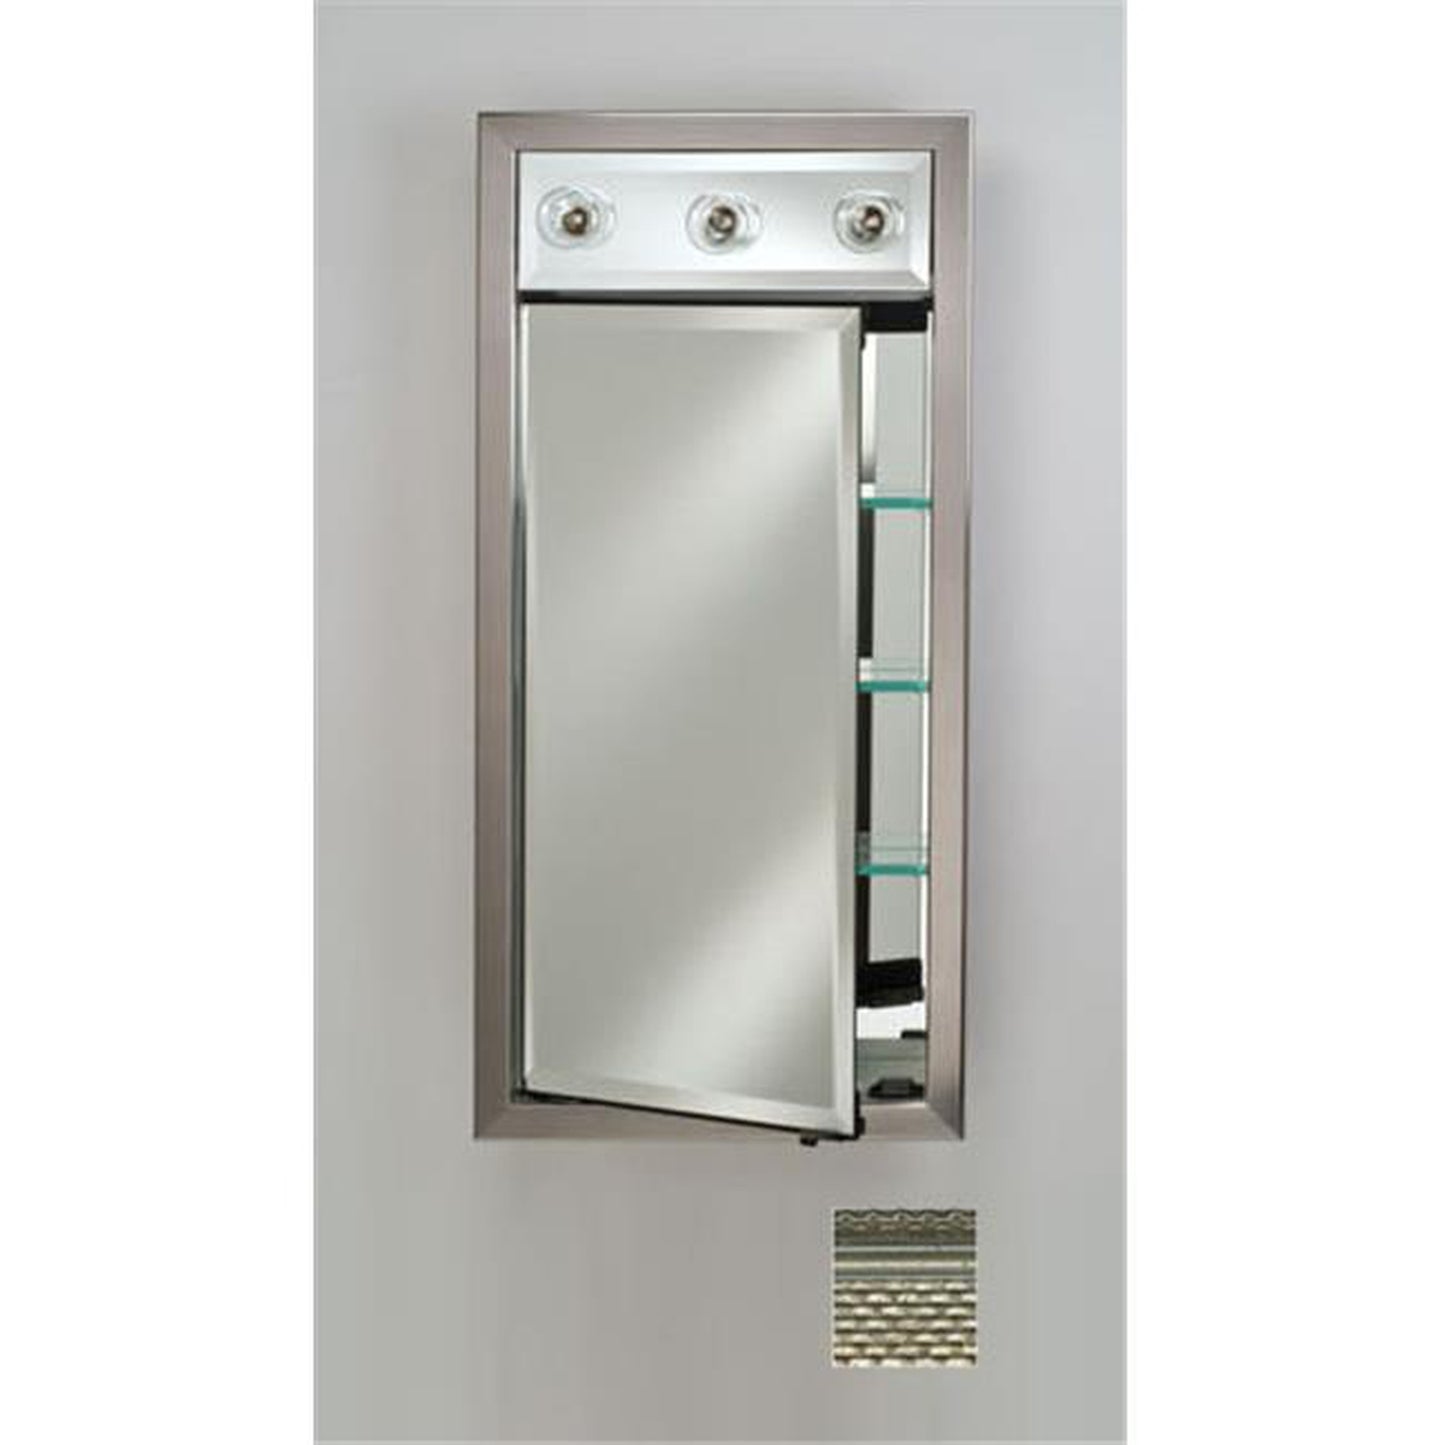 Afina Signature 17" x 34" Elegance Antique Silver Recessed Right Hinged Single Door Medicine Cabinet With Contemporary Lights